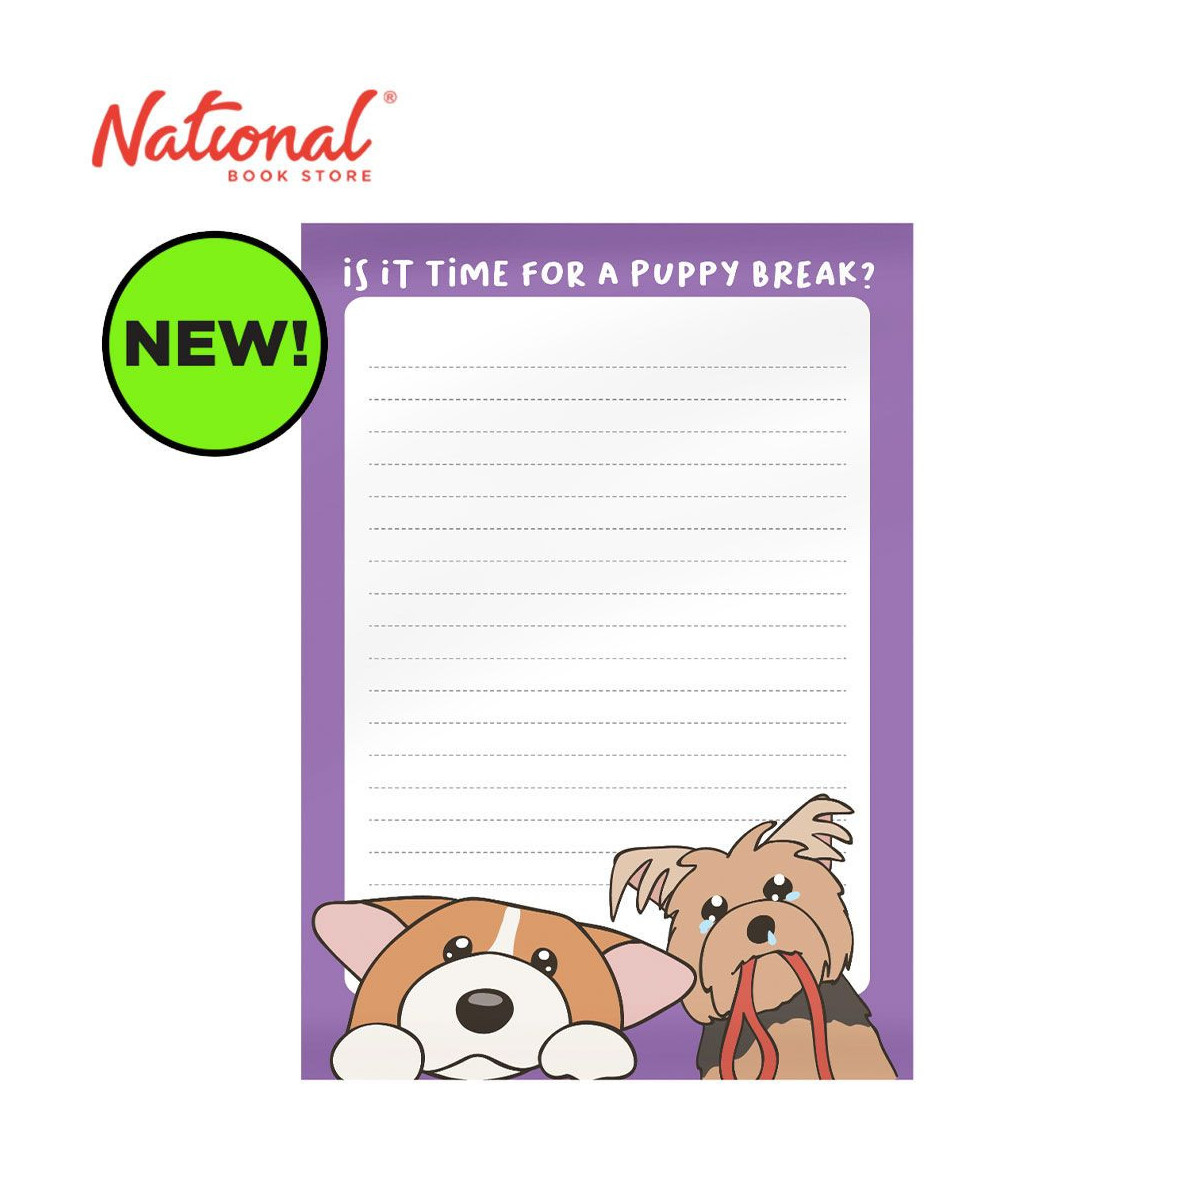 Notepad 5x7 inches Jumbo Relatable 50 Leaves Kdrama Dogs - Office & School Supplies